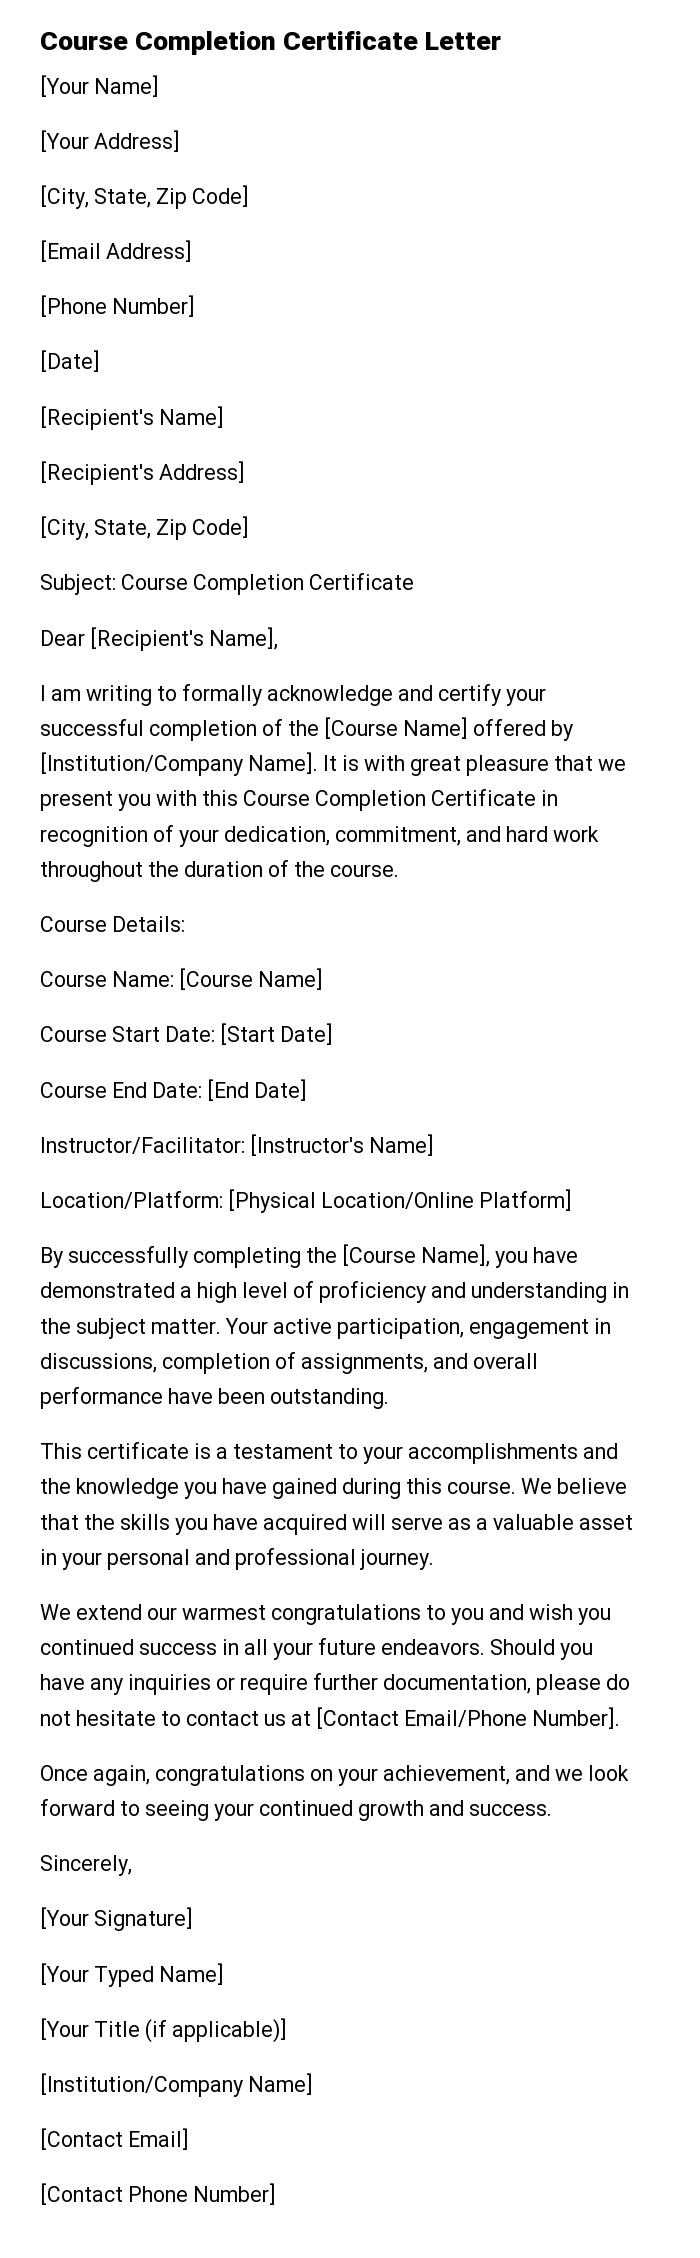 Course Completion Certificate Letter